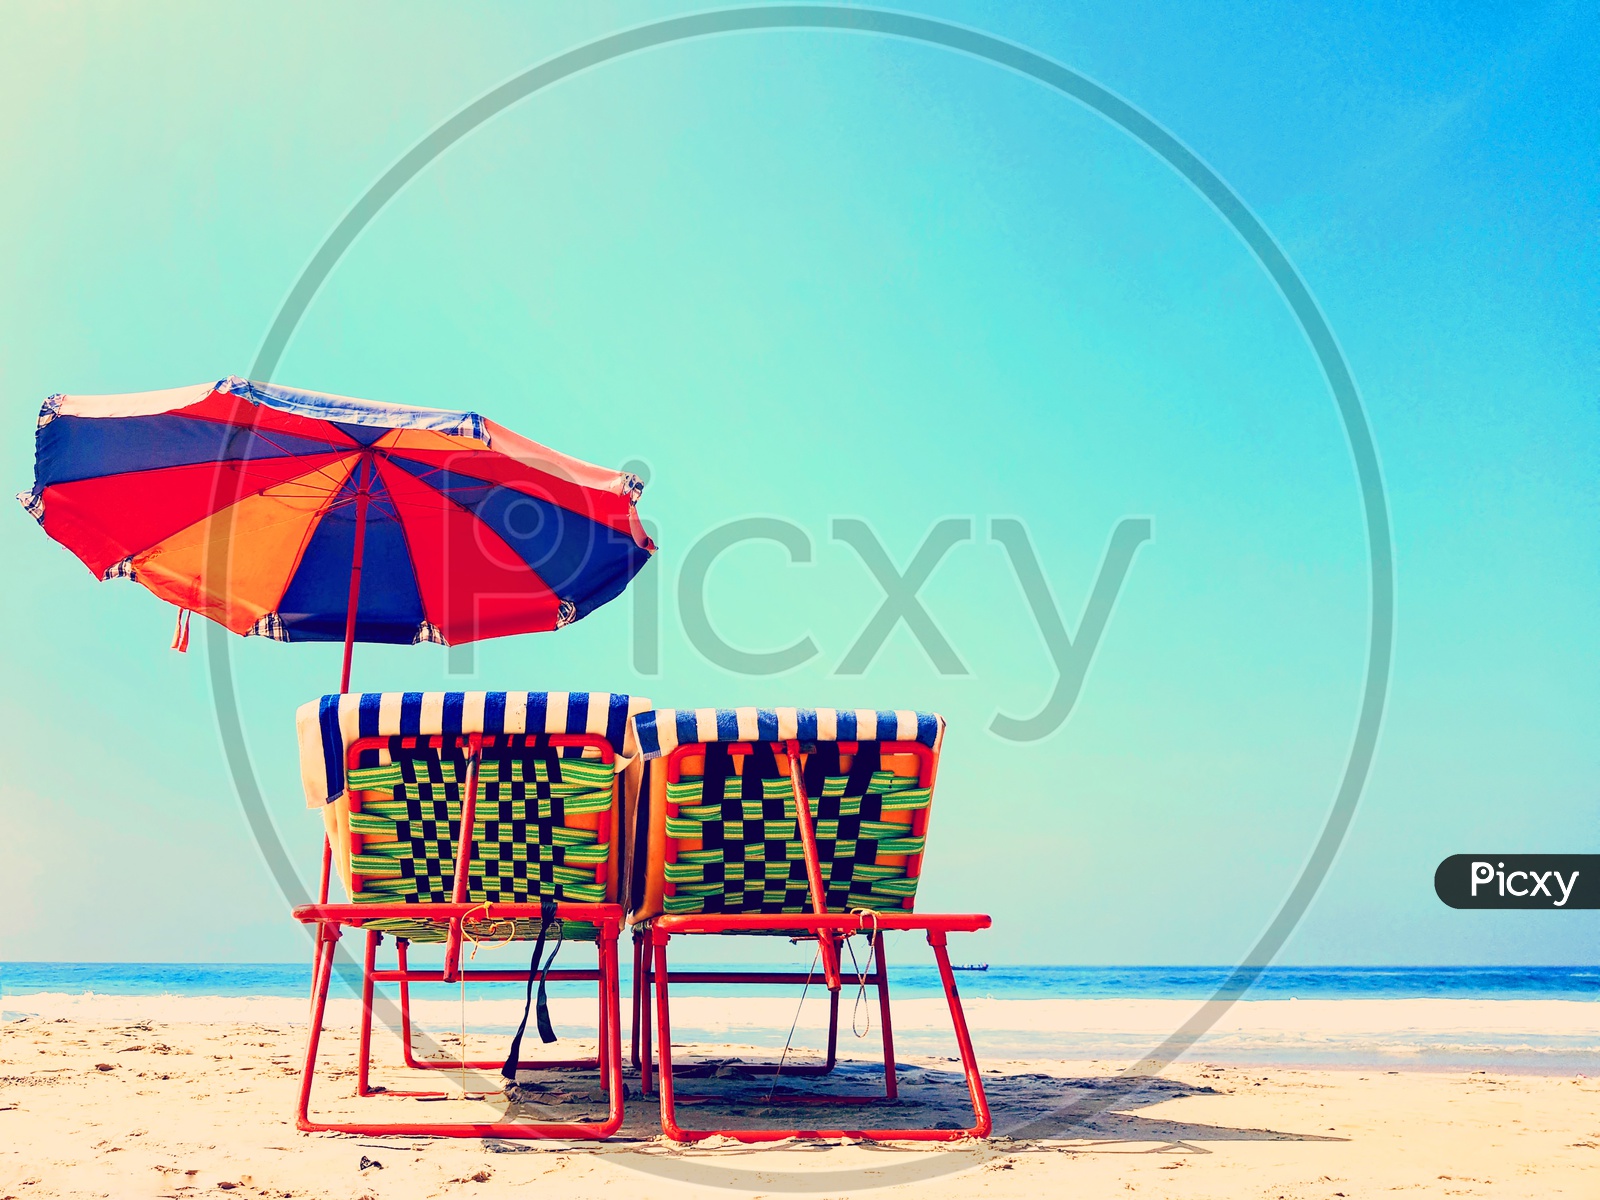 Resting Chairs With A Colourful Umbrella On A Sunny Tropical Beach